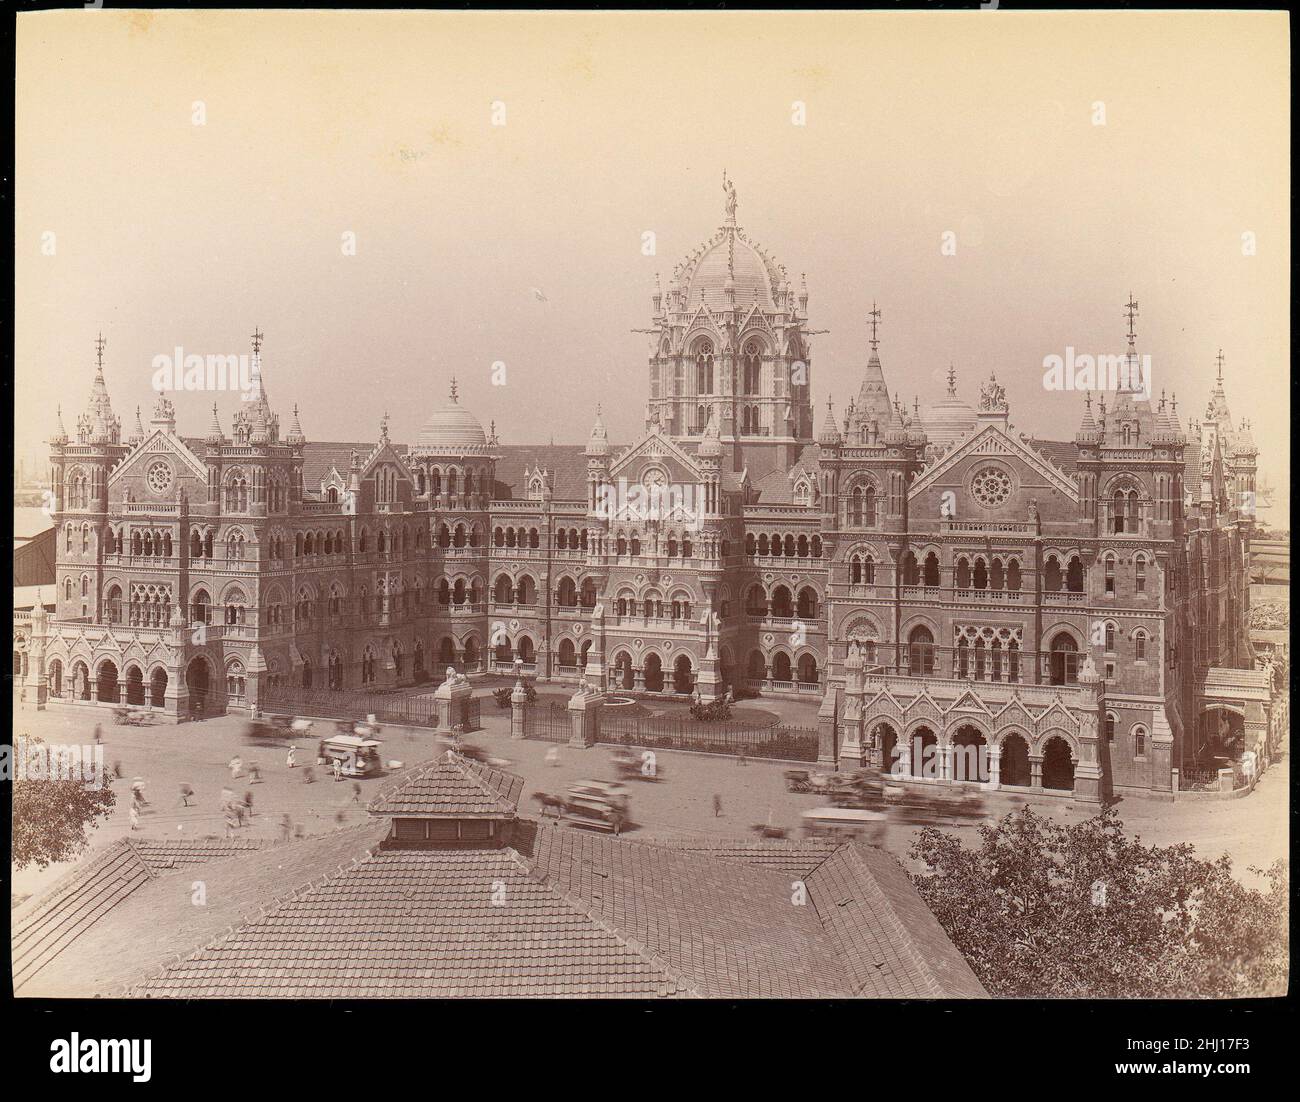 [Victoria Terminus Building, Mumbai] 1860s–70s Unknown Frederick W. Stevens designed this building for the Great Indian Peninsular Railway, to serve as its main train station in Bombay. The style combines the Venetian Gothic popular in England at the time with elements of Indian architecture, and is built in the local red sandstone. A thirteen-foot personification of Progress, raising her arm toward the skies, tops the central dome. The Terminus opened in 1887 in time to celebrate Queen Victoria's Golden Jubilee.. [Victoria Terminus Building, Mumbai]  264519 Stock Photo